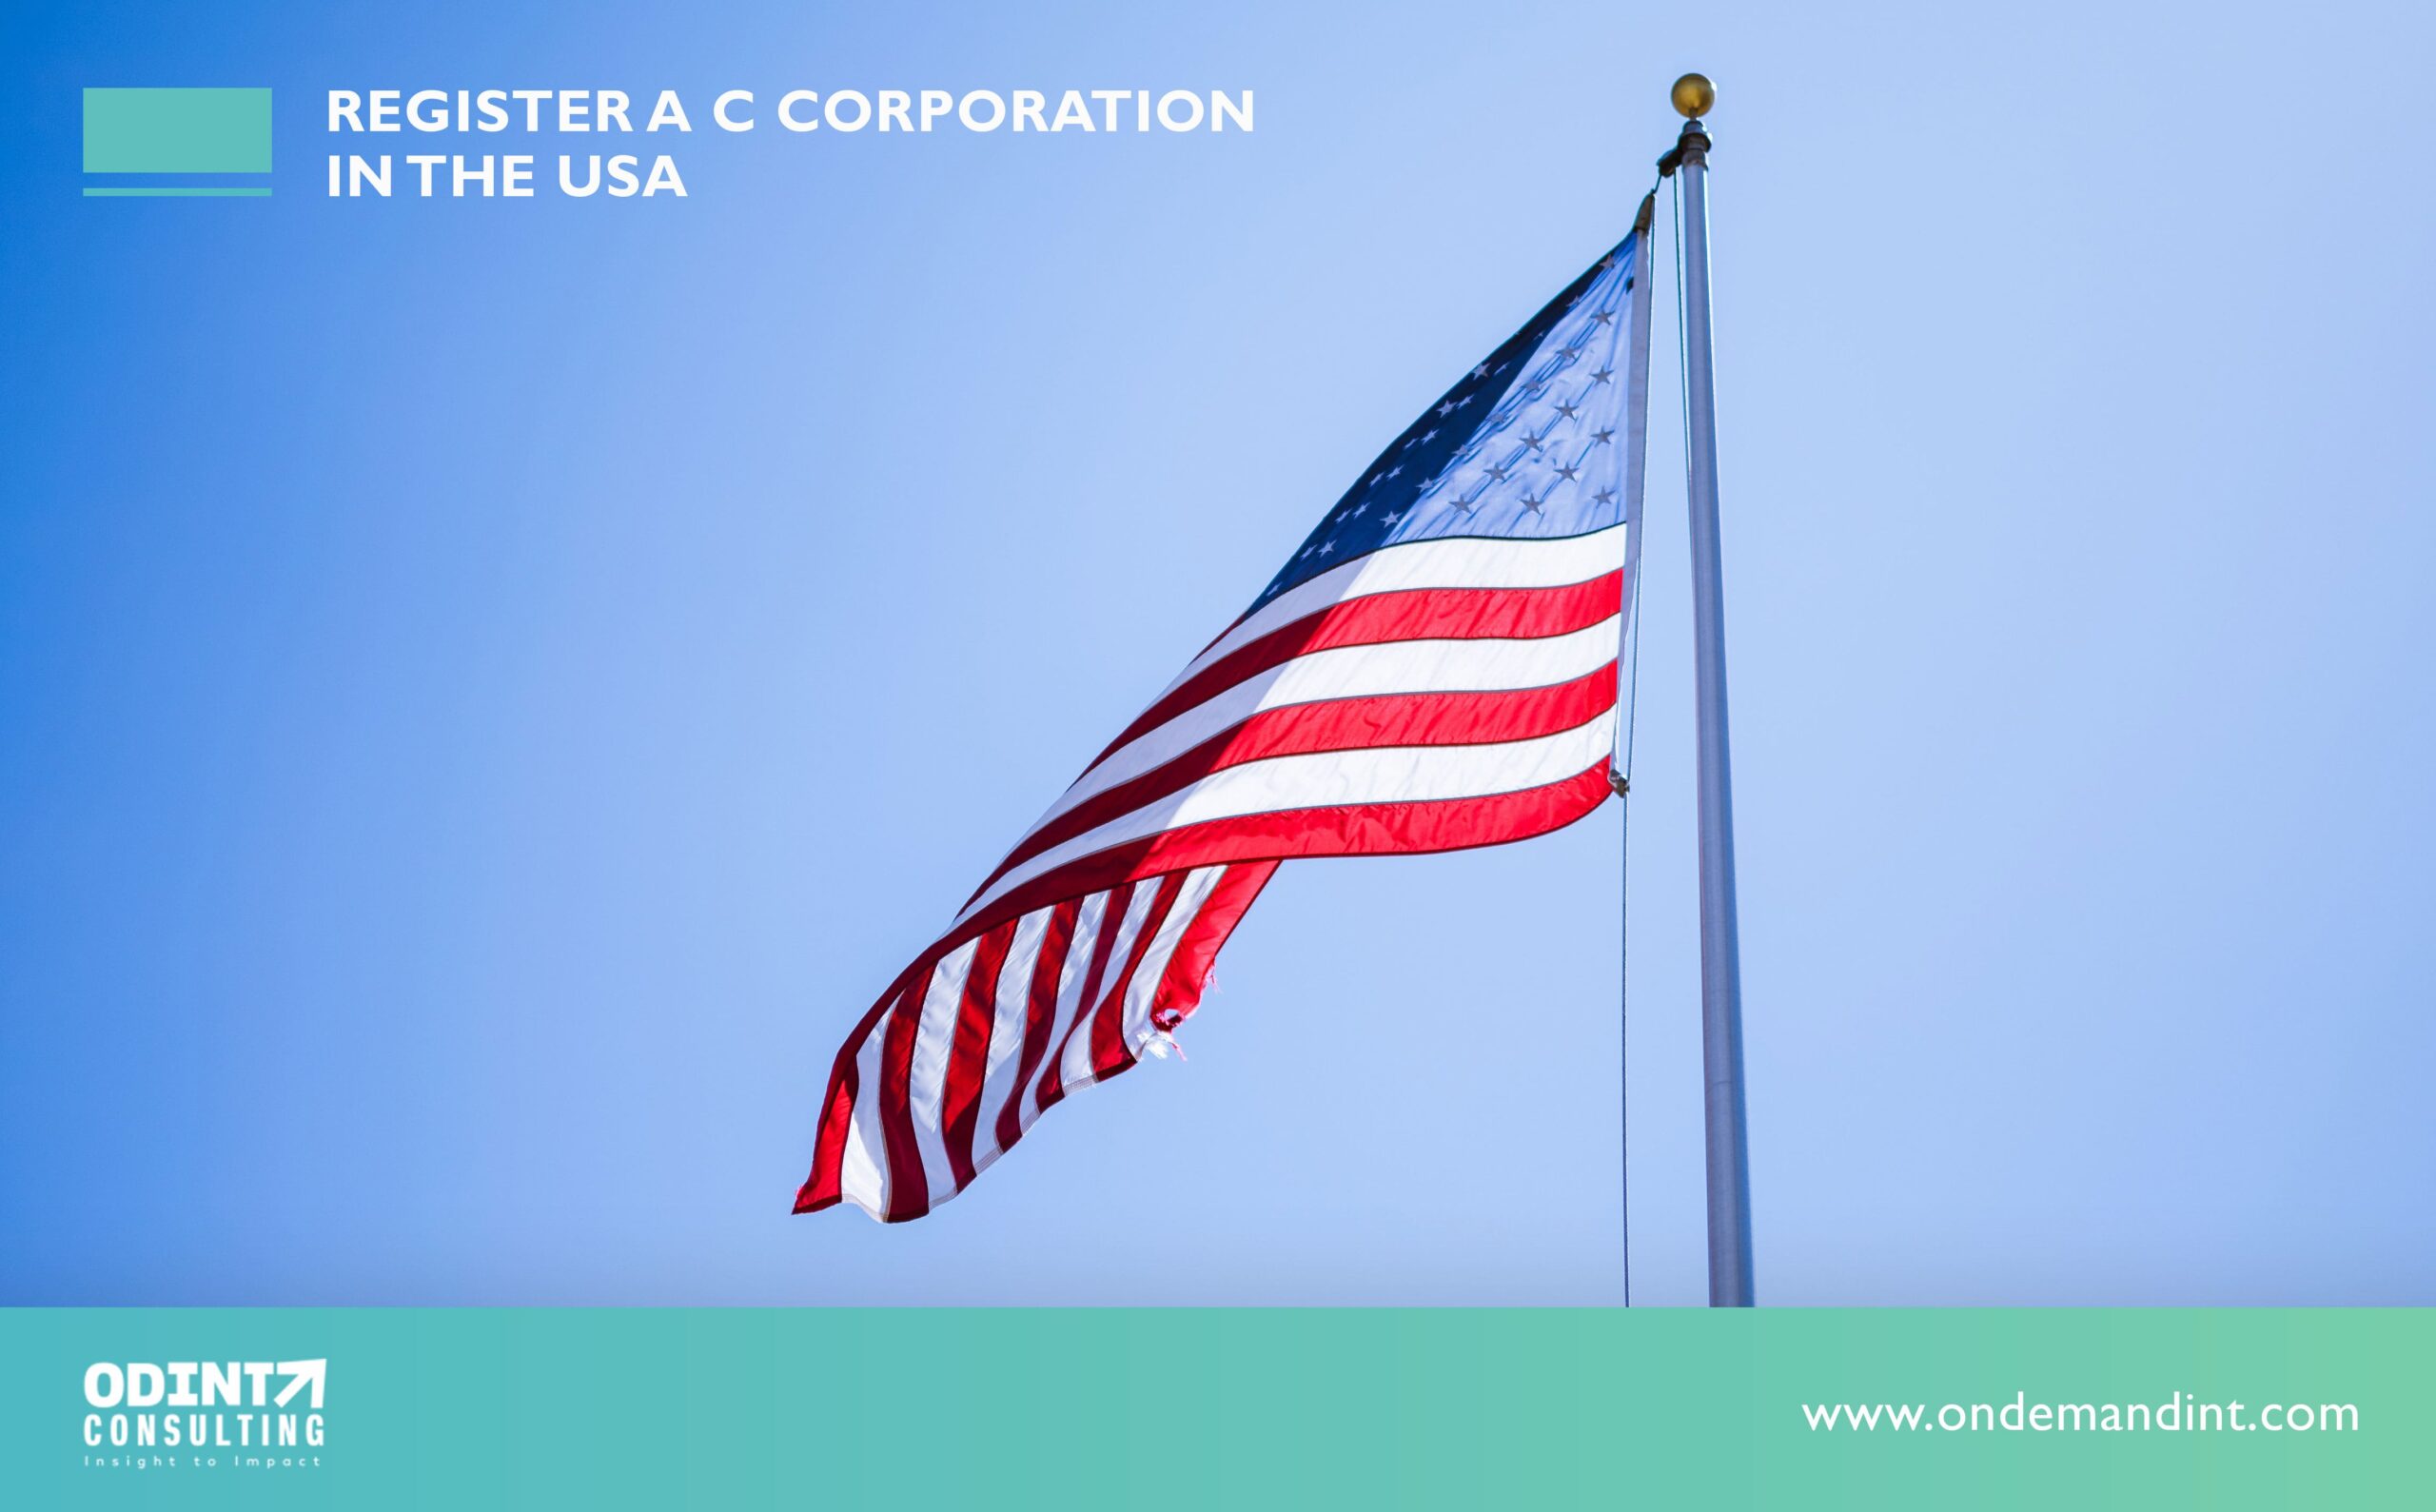 Register a C Corporation in the USA in 7 Steps: Procedure, Requirements, Benefits & Drawbacks